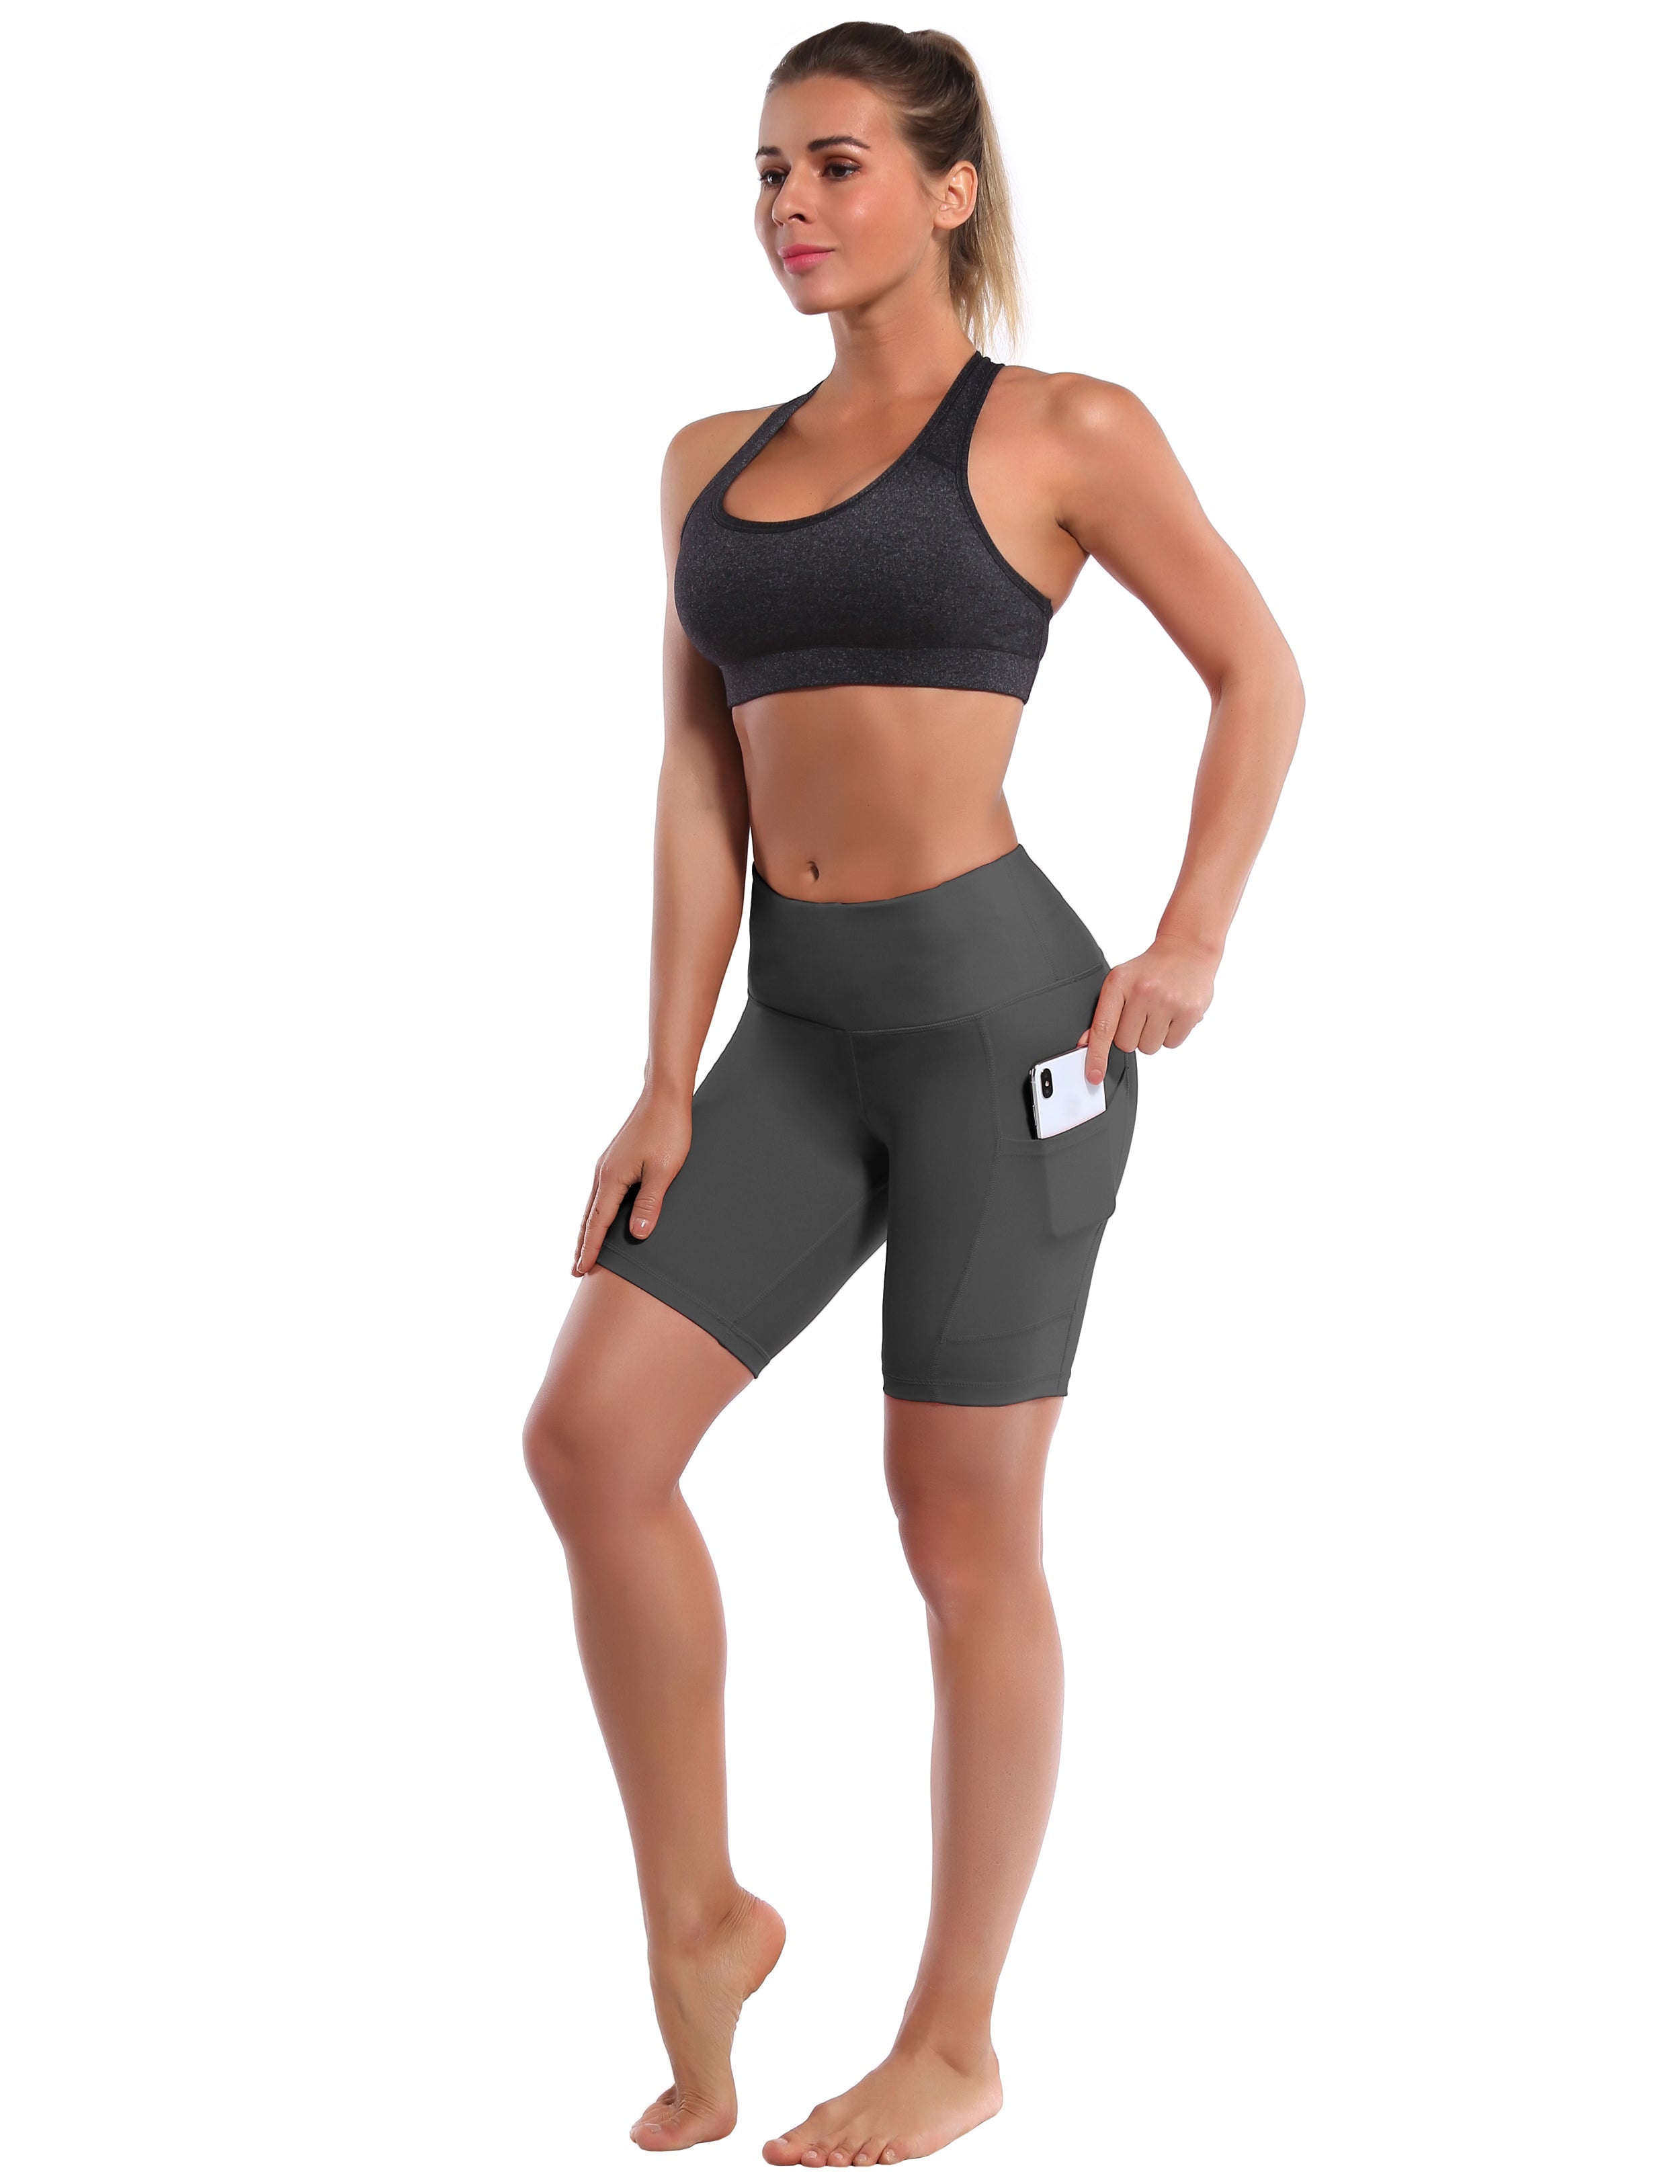 8" Side Pockets Jogging Shorts shadowcharcoal Sleek, soft, smooth and totally comfortable: our newest style is here. Softest-ever fabric High elasticity High density 4-way stretch Fabric doesn't attract lint easily No see-through Moisture-wicking Machine wash 75% Nylon, 25% Spandex